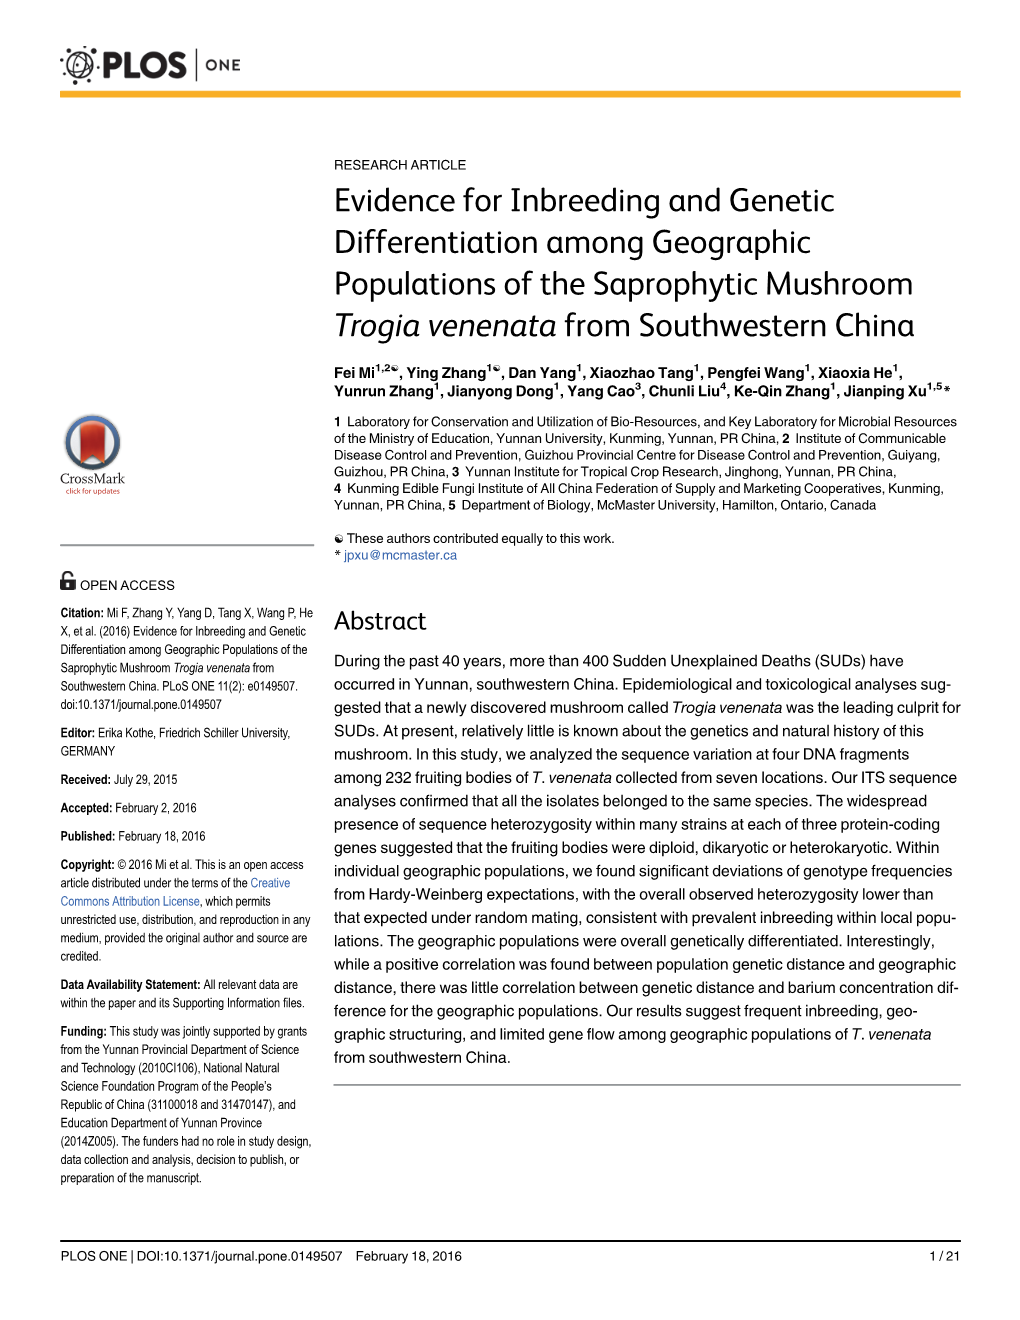 Evidence for Inbreeding and Genetic Differentiation Among Geographic Populations of the Saprophytic Mushroom Trogia Venenata from Southwestern China